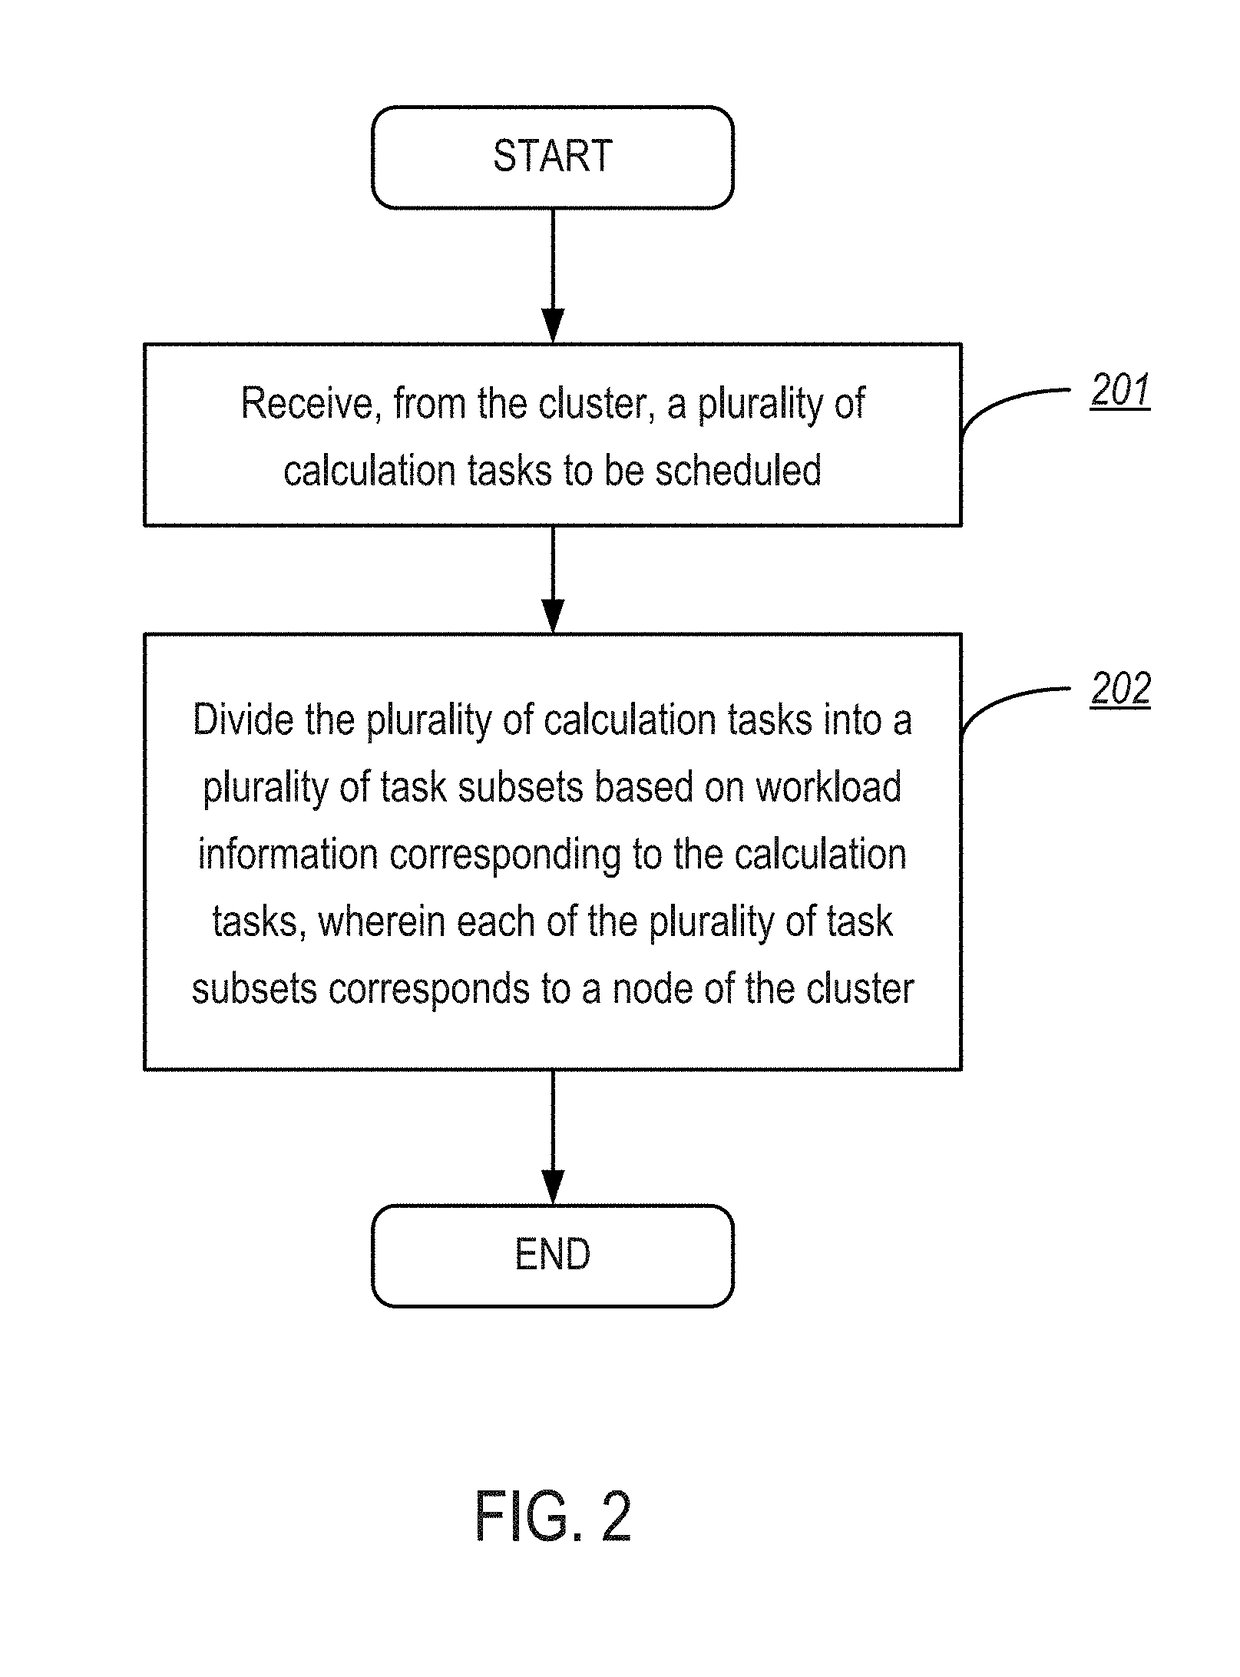 Method and apparatus for scheduling calculation tasks among clusters